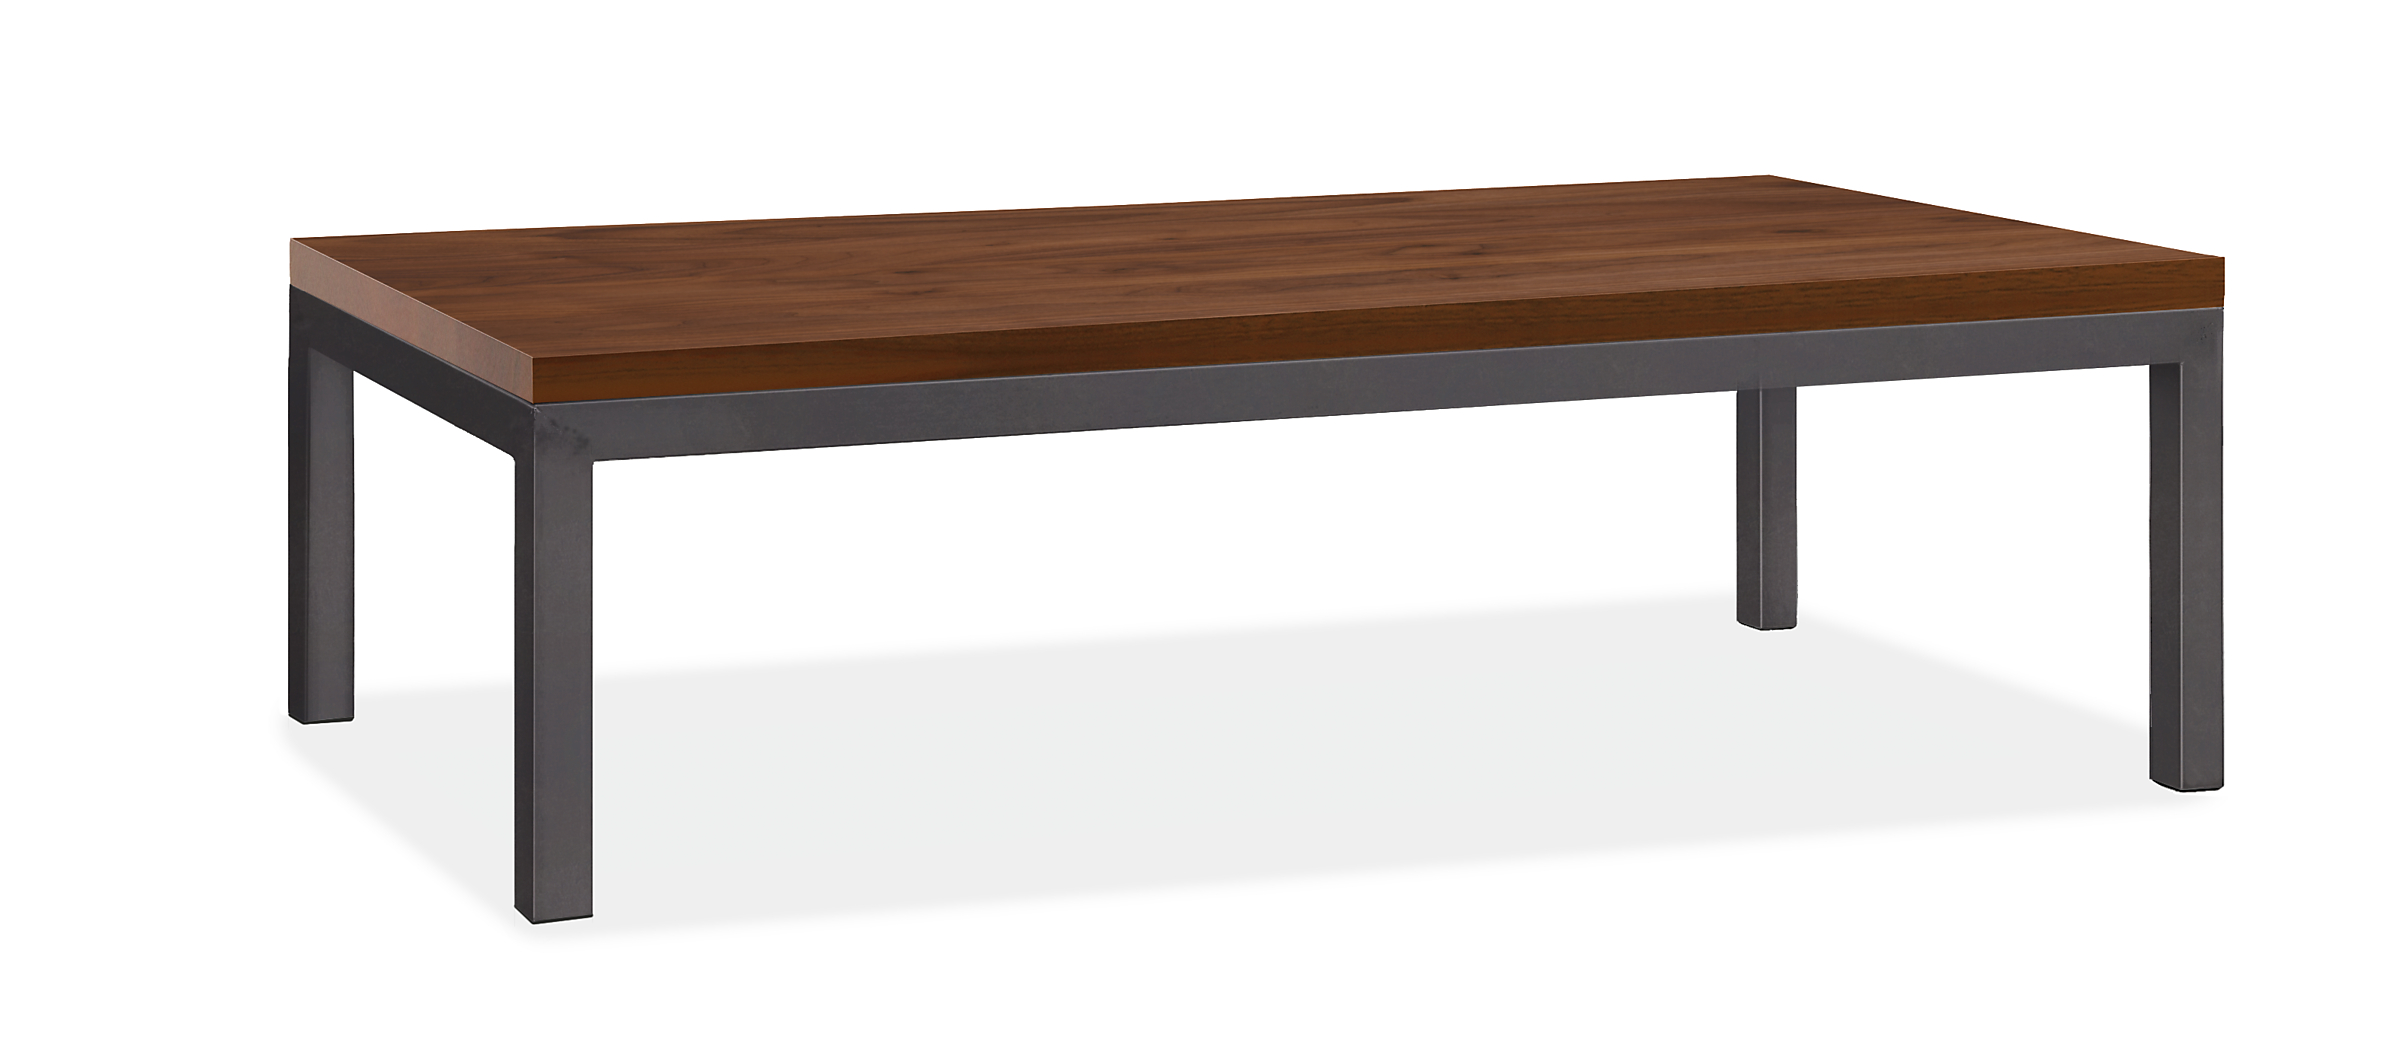 Parsons 60w 24d 16h Coffee Table with 1.5" Leg